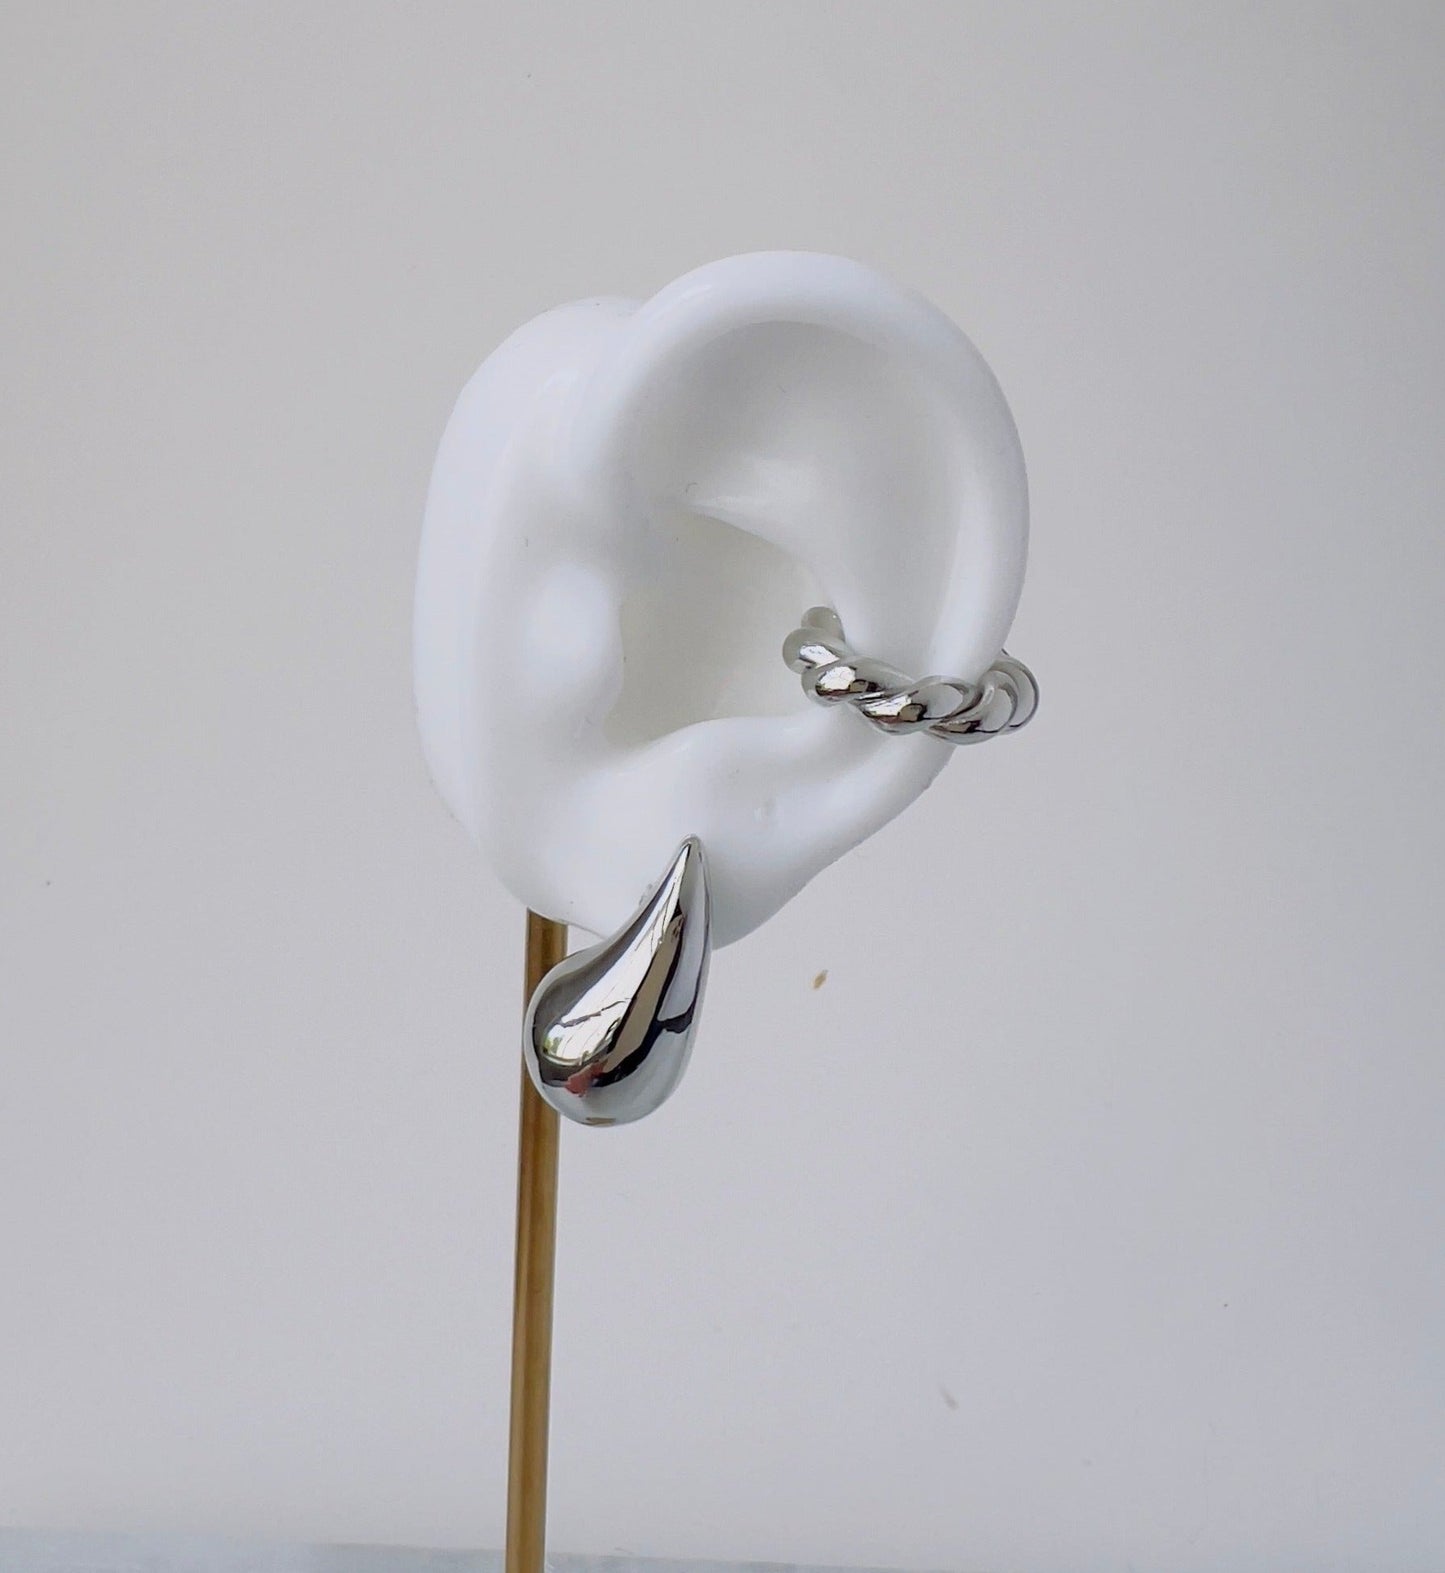 Trendy silver braided ear cuff - Perfect for unpierced ears, offering a fashionable and versatile look